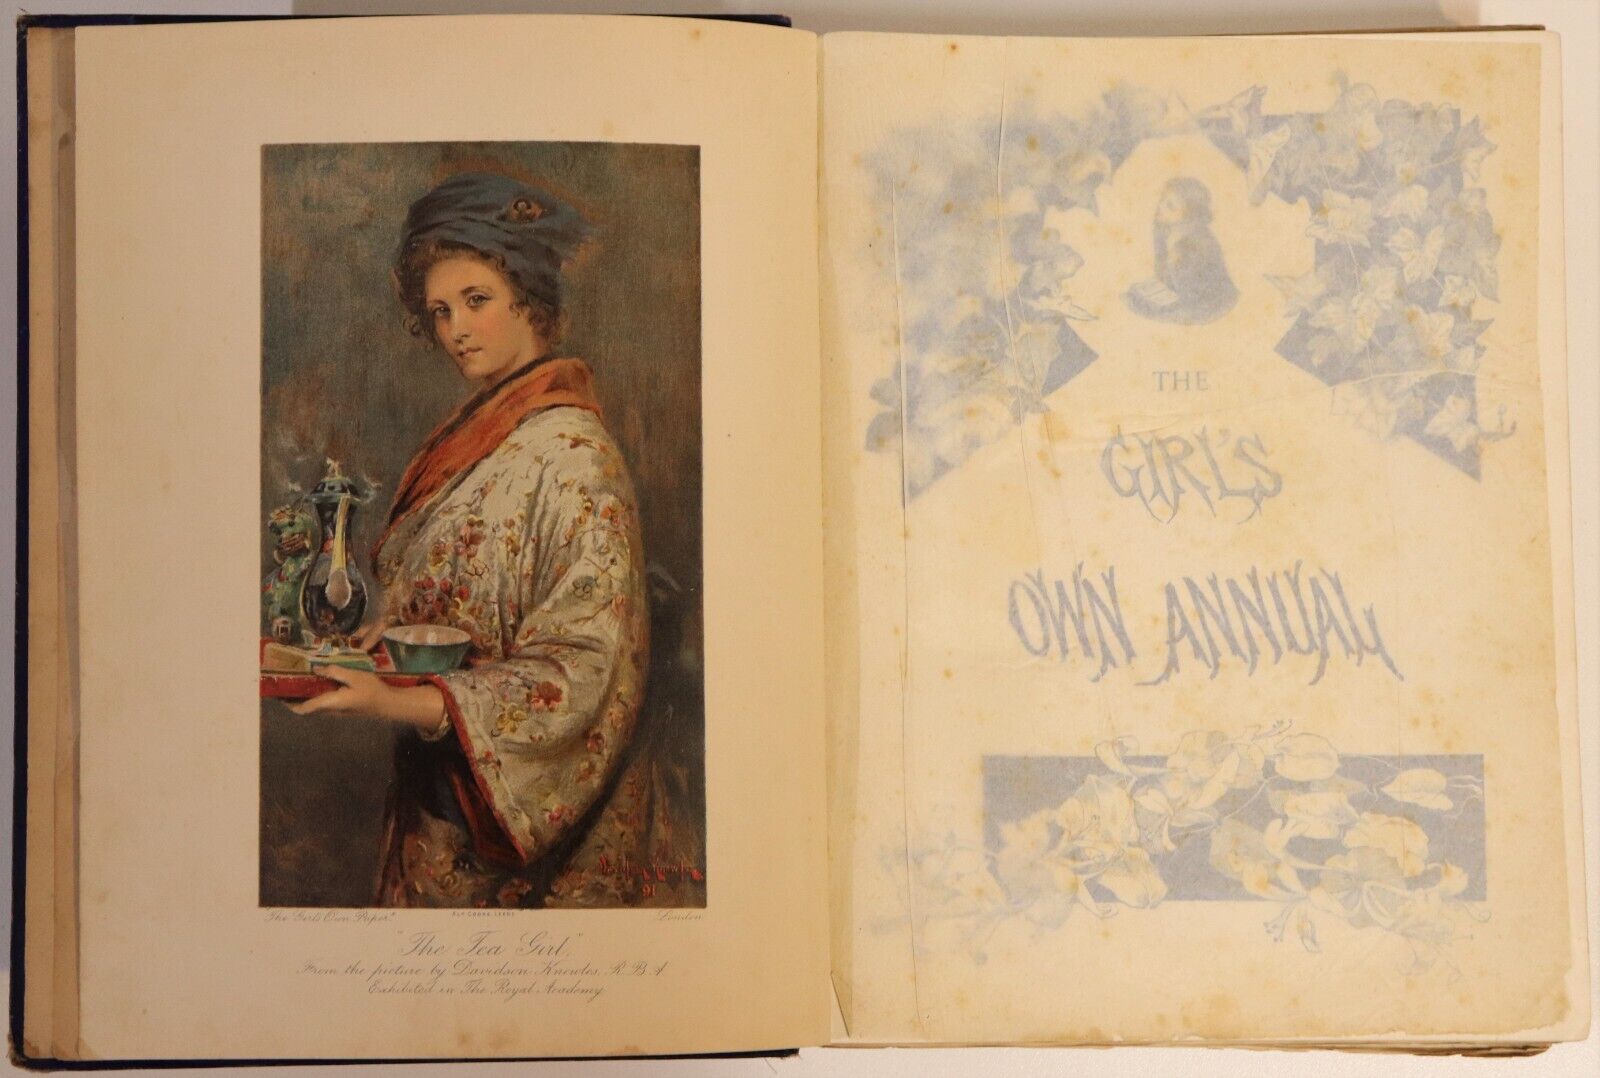 The Girl's Own Annual - 1892 - Antique Children's Book - 0